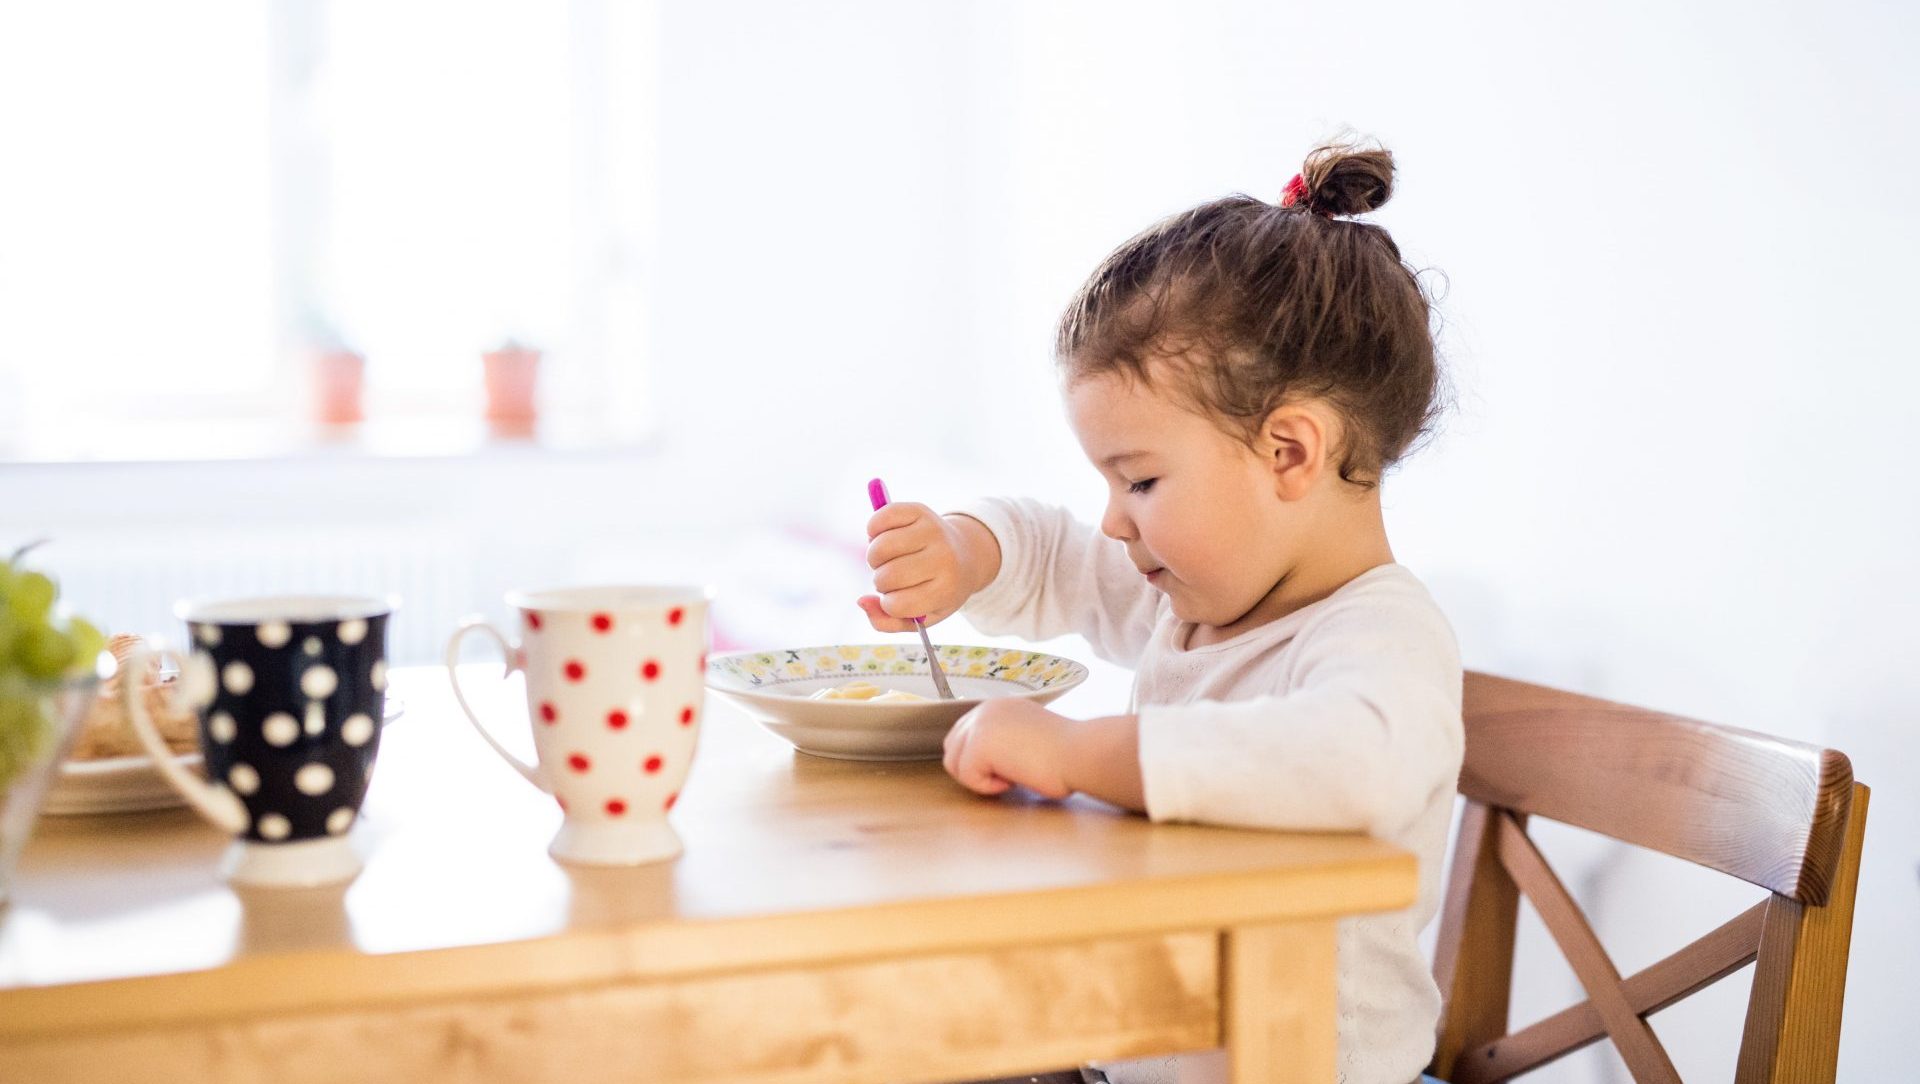 little-girl-sitting-at-the-table-eating-breakfast-PTQF2N8-min